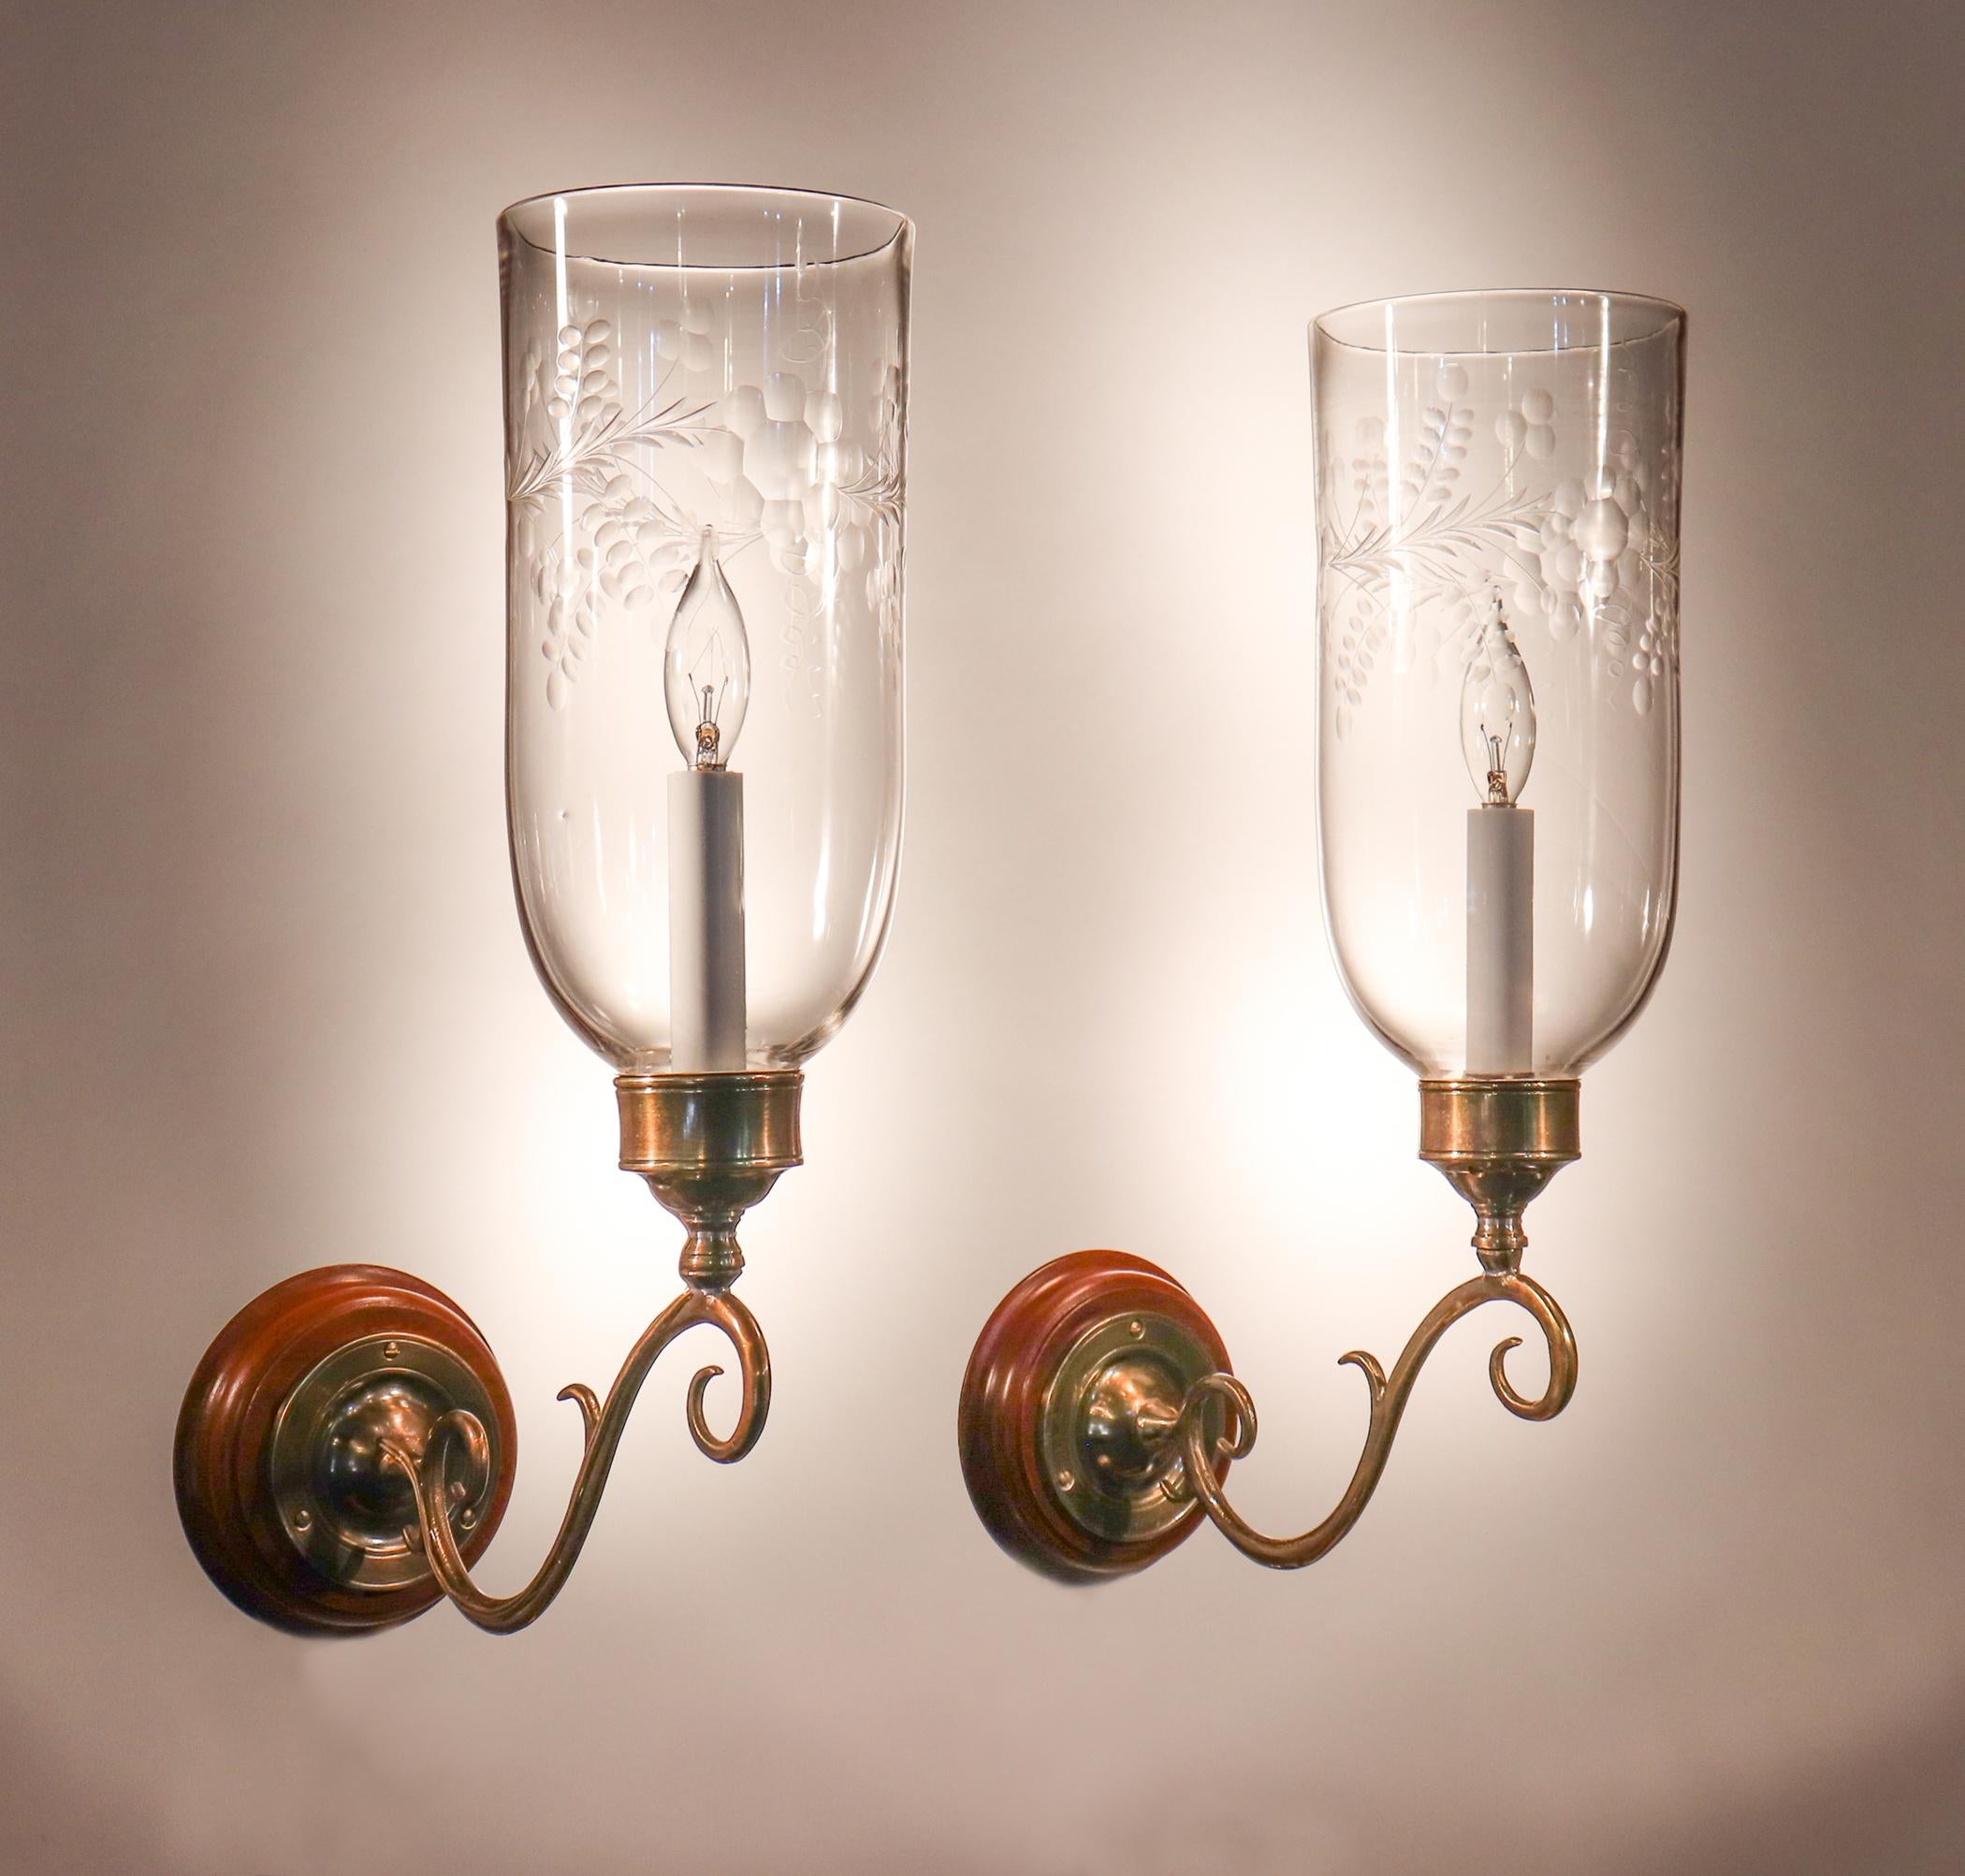 An exquisite pair of English hurricane shade wall sconces with etched floral motif. These circa 1880 shades feature an attractive, straight form and desirable swirling in the hand blown glass. The sconces have been newly electrified, each with a